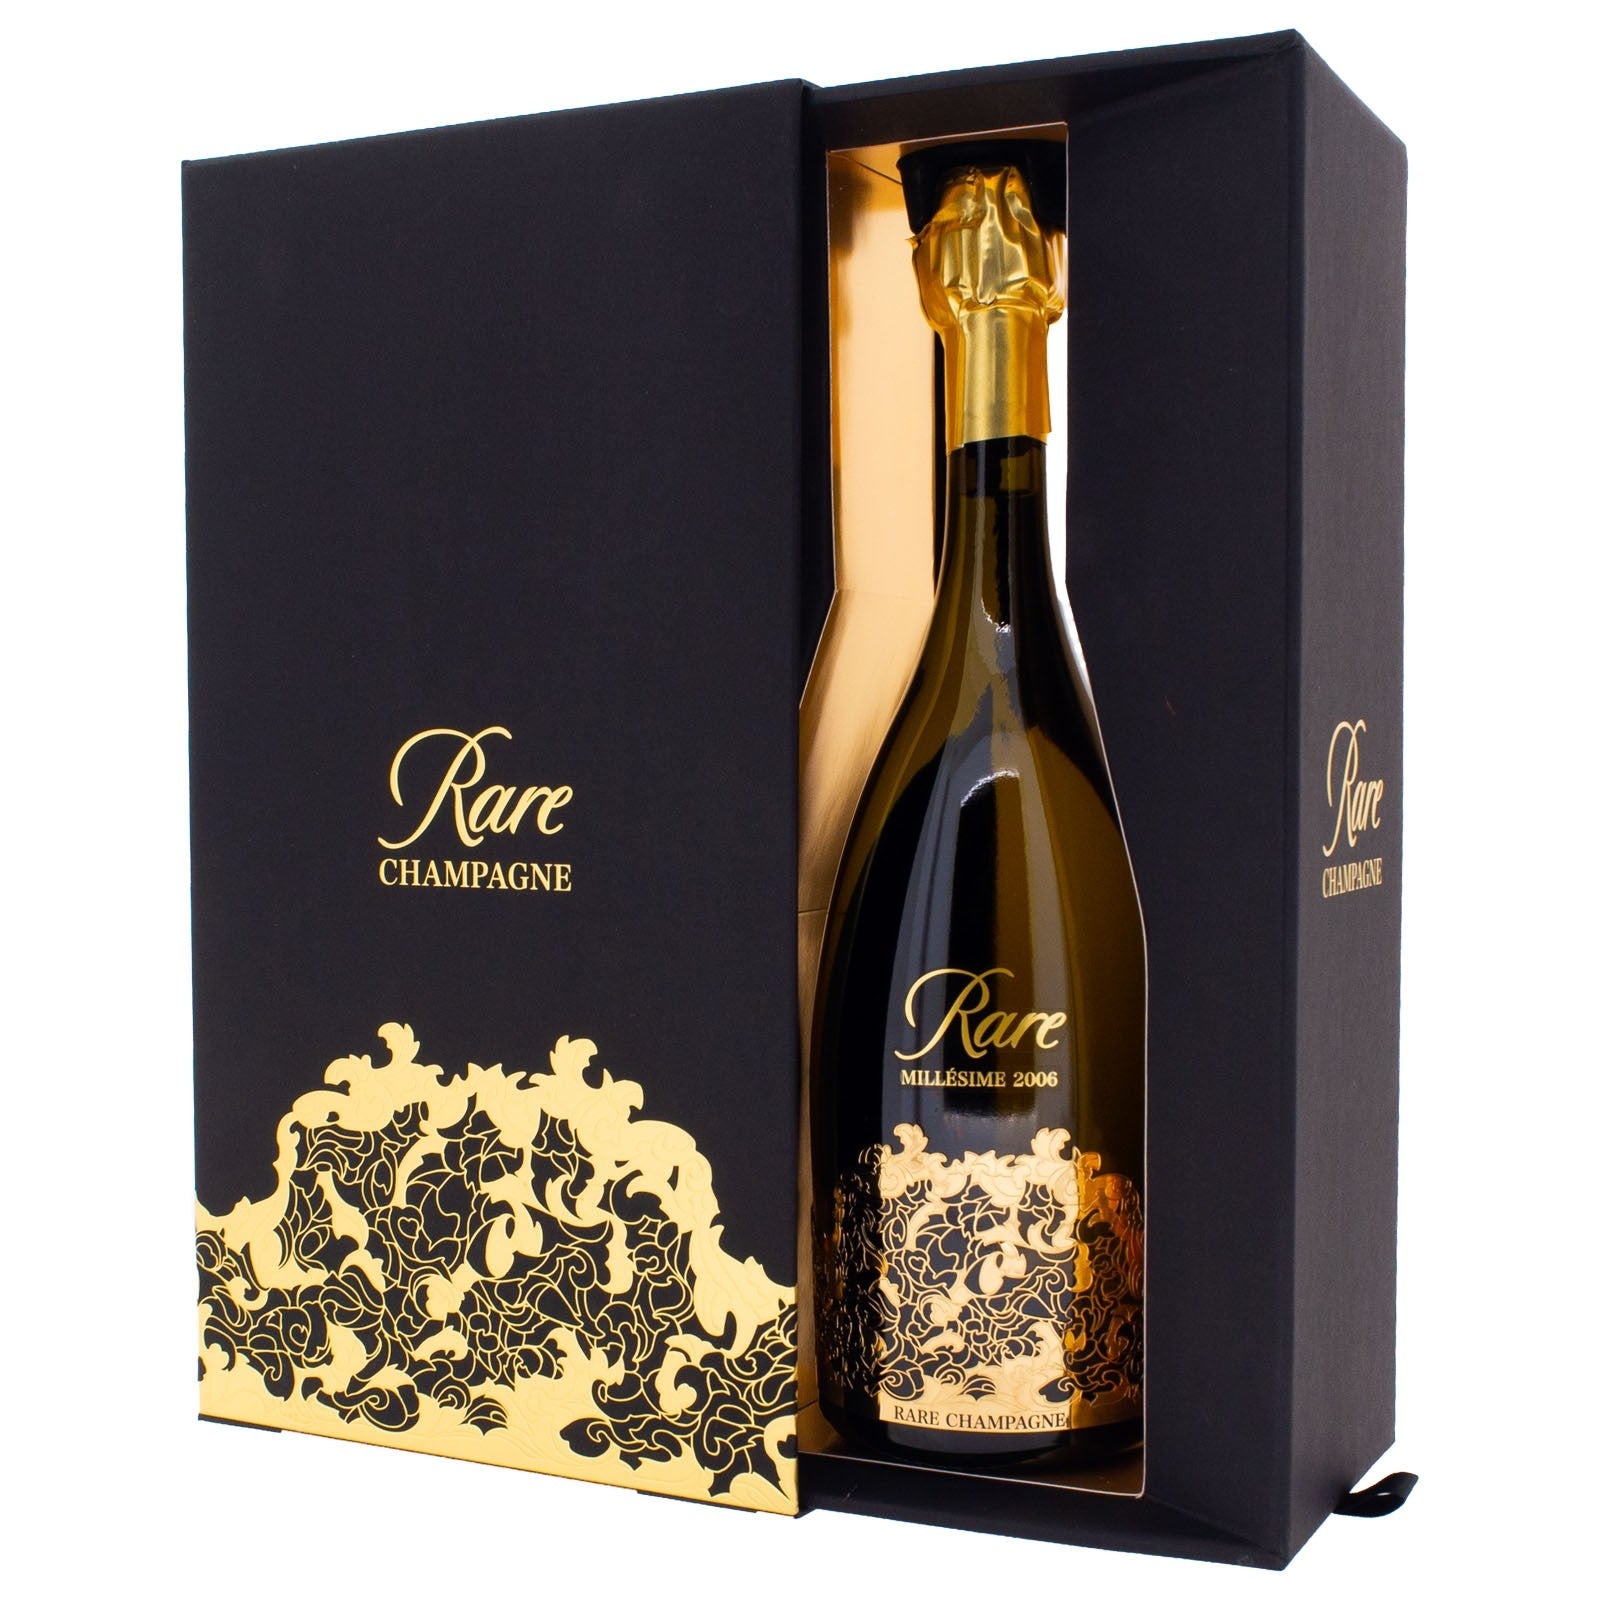 Piper-Heidsieck Brut Vintage Rare with Gift Box 2006 (750ml)